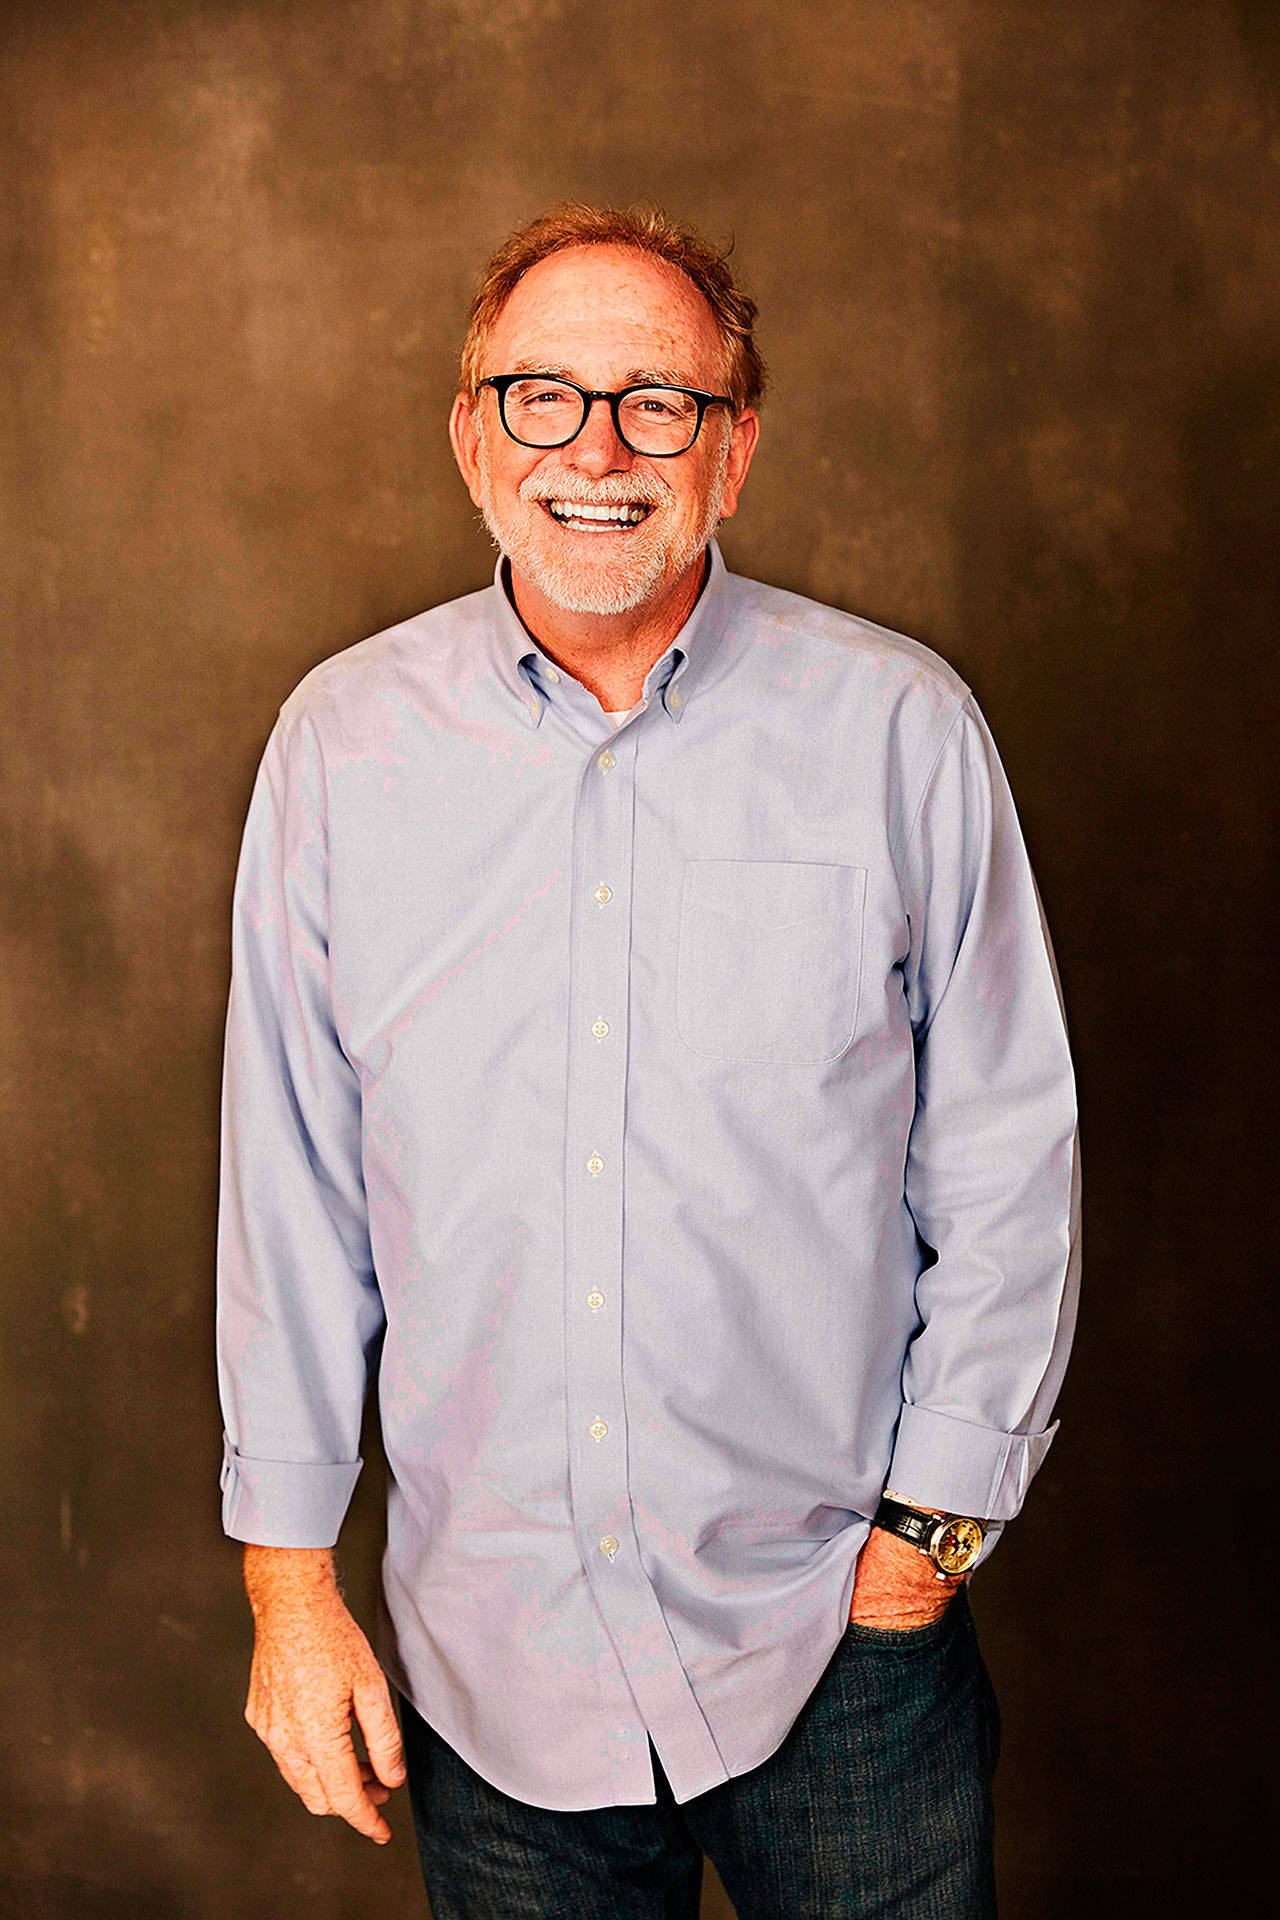 Bob Goff, author of “Love Does” and founder of the Love Does human rights organization, will speak April 14 at the YMCA of Snohomish County’s Good Friday Prayer Breakfast.